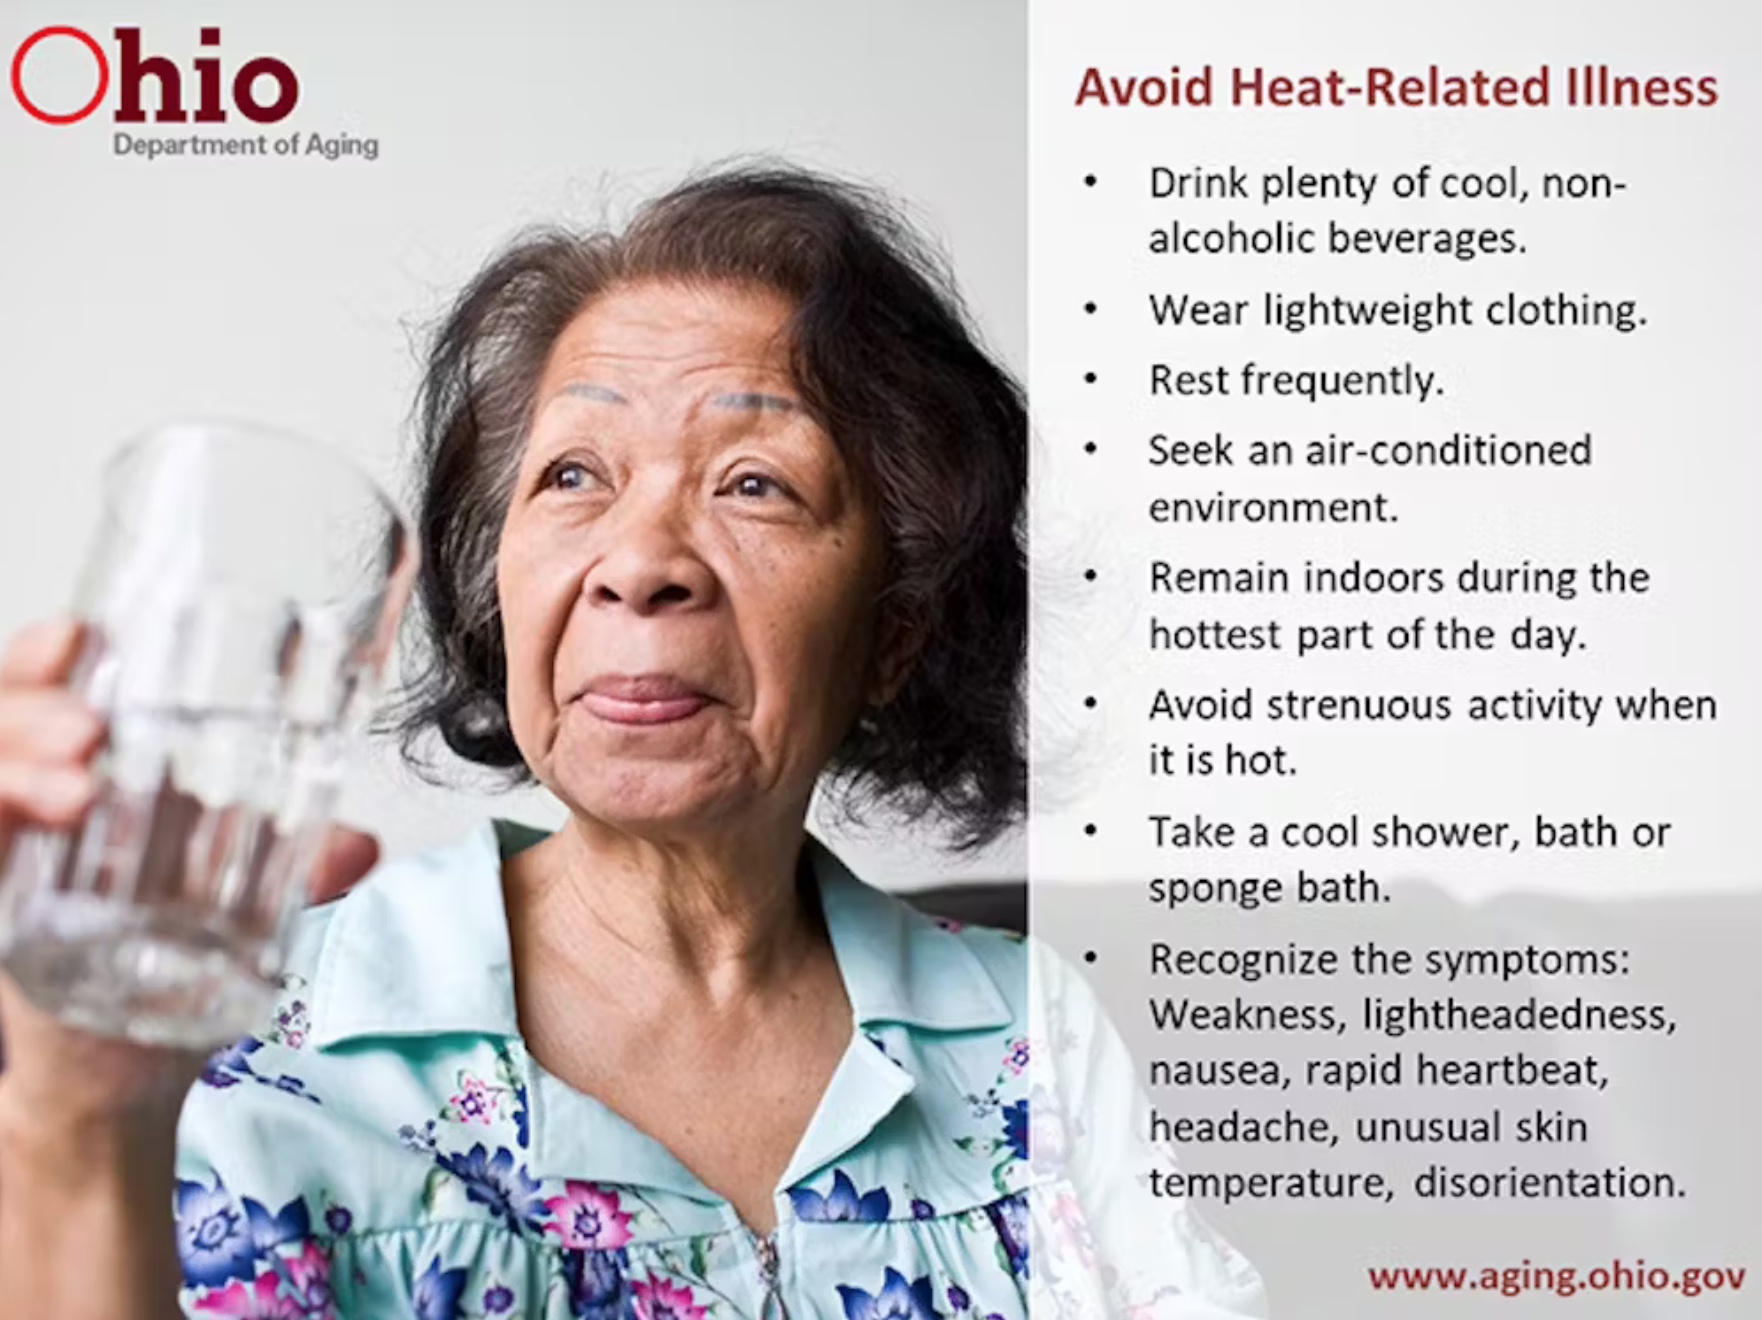  Tips for avoiding heat illness can save lives, but they can be difficult to follow, even in wealthy countries. Ohio Department of Aging 